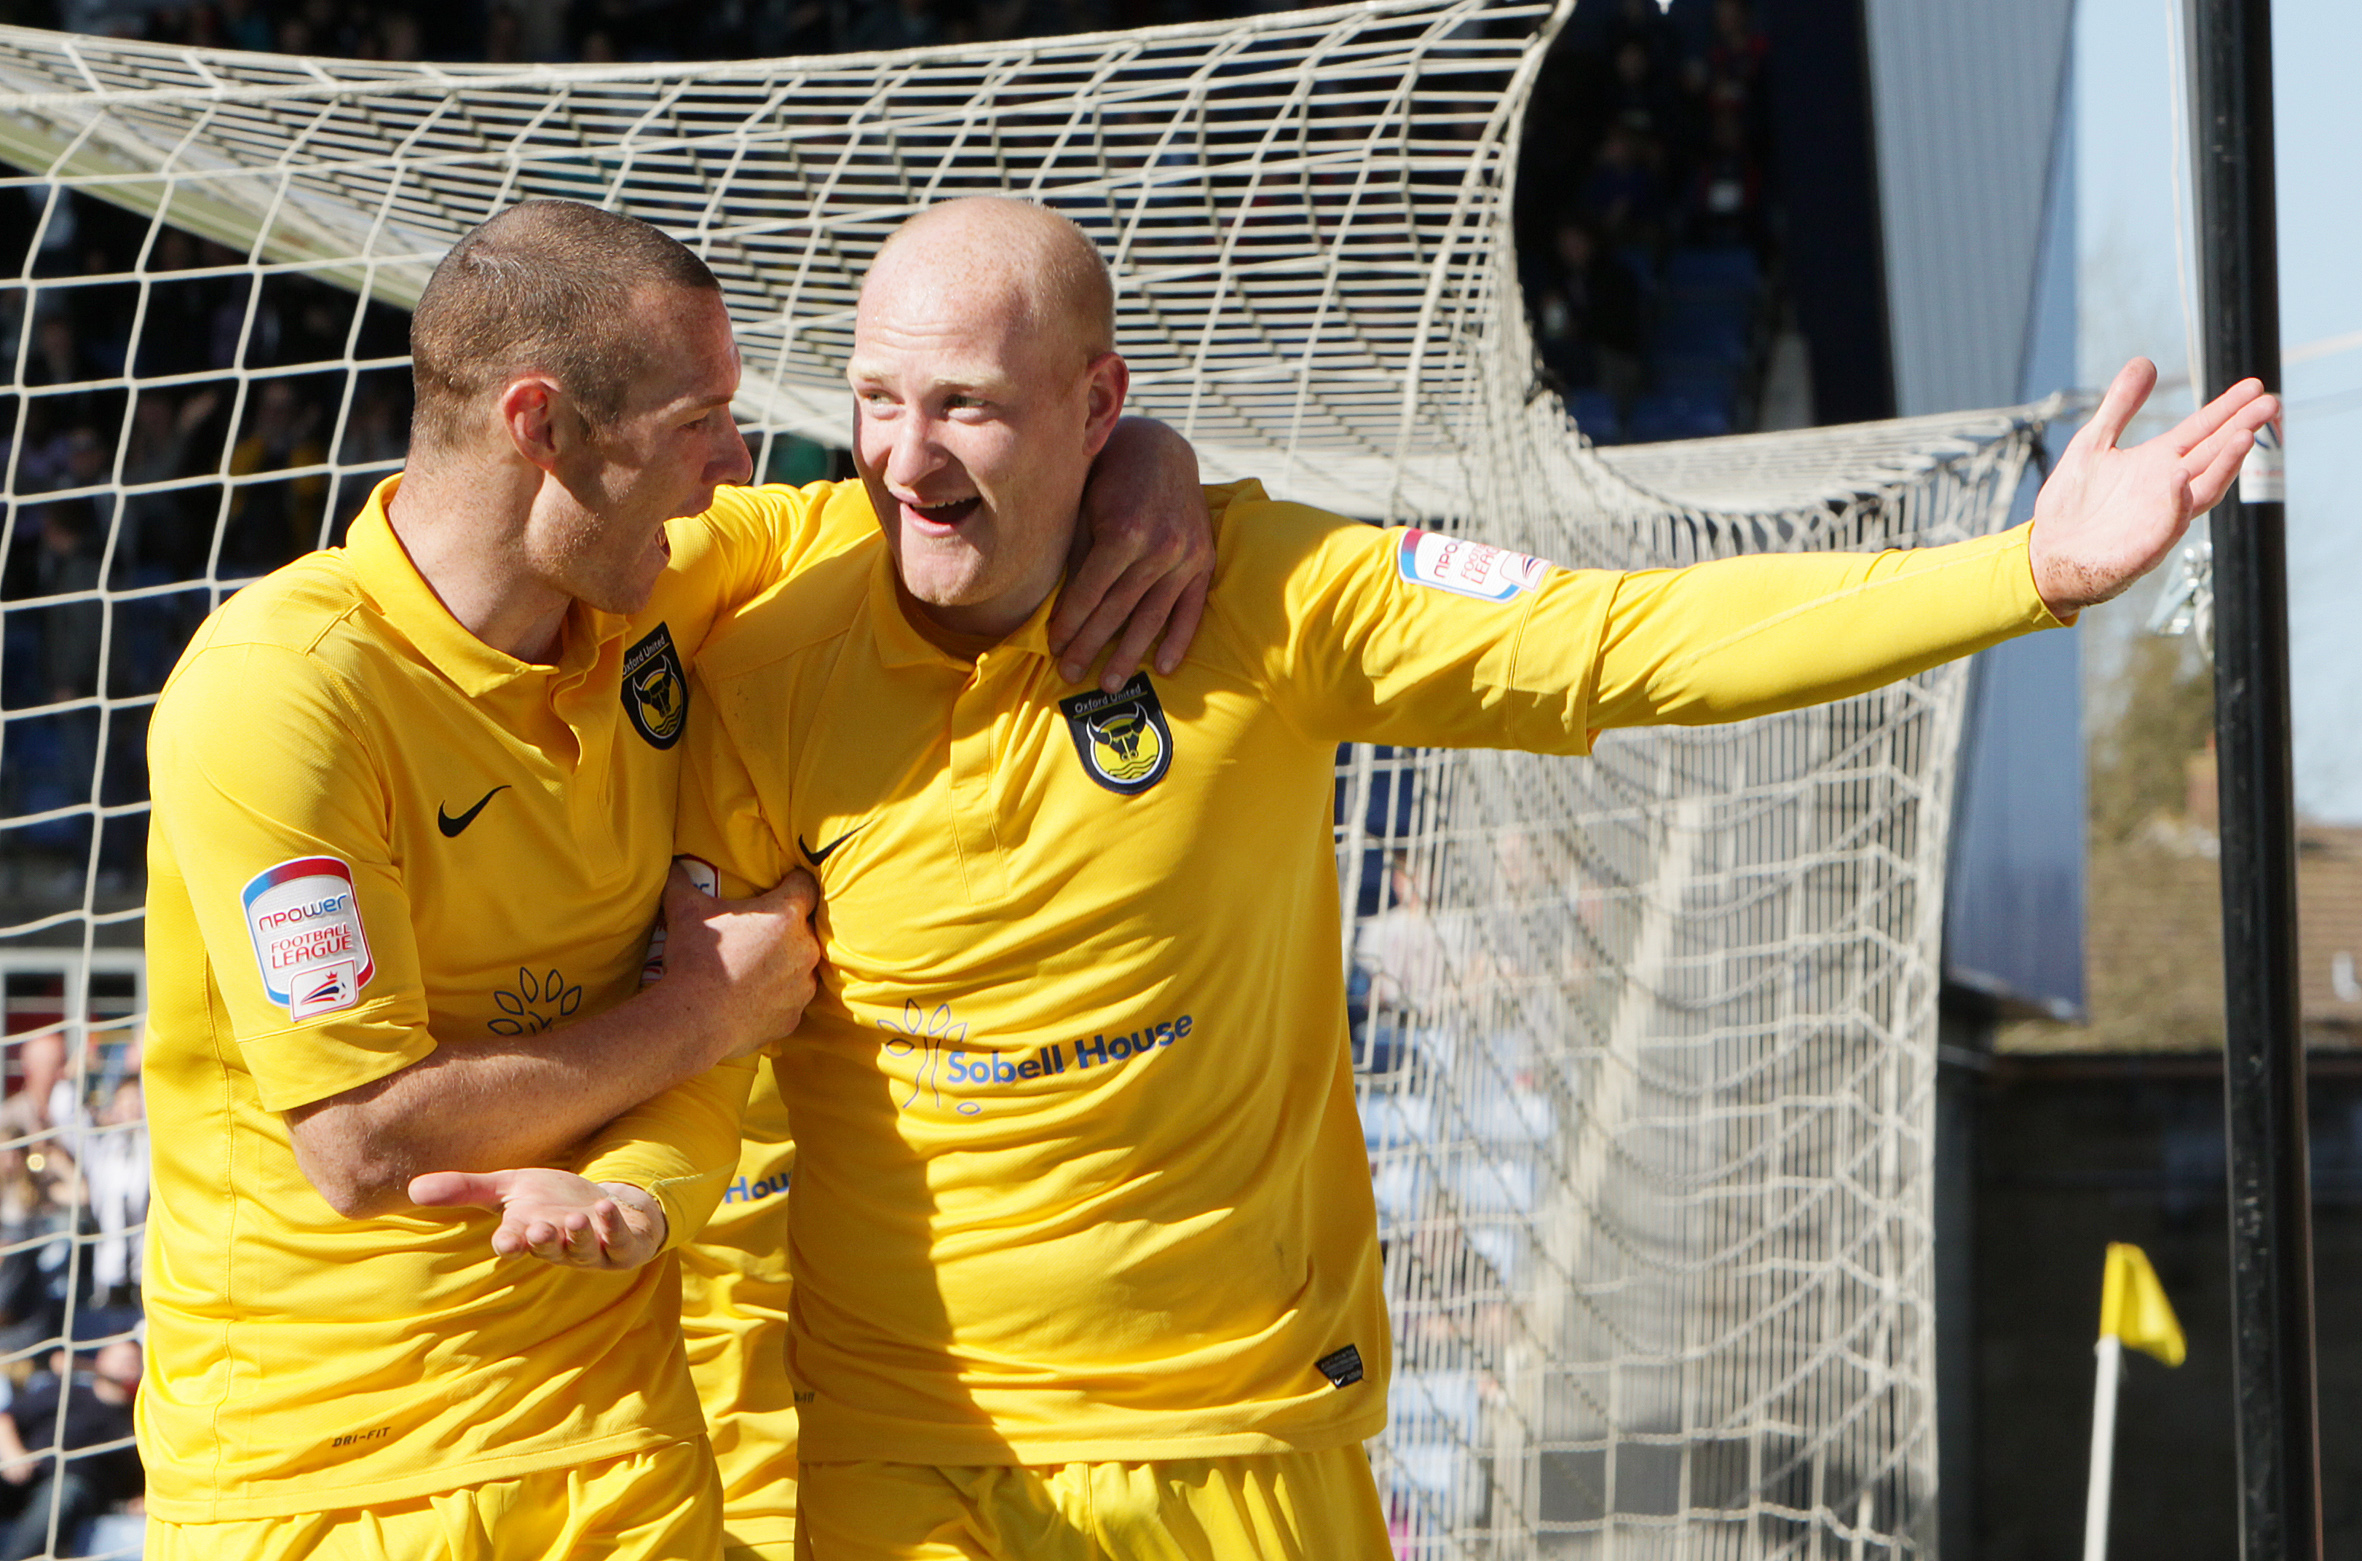 Oxford United legend James Constable leaves Banbury United